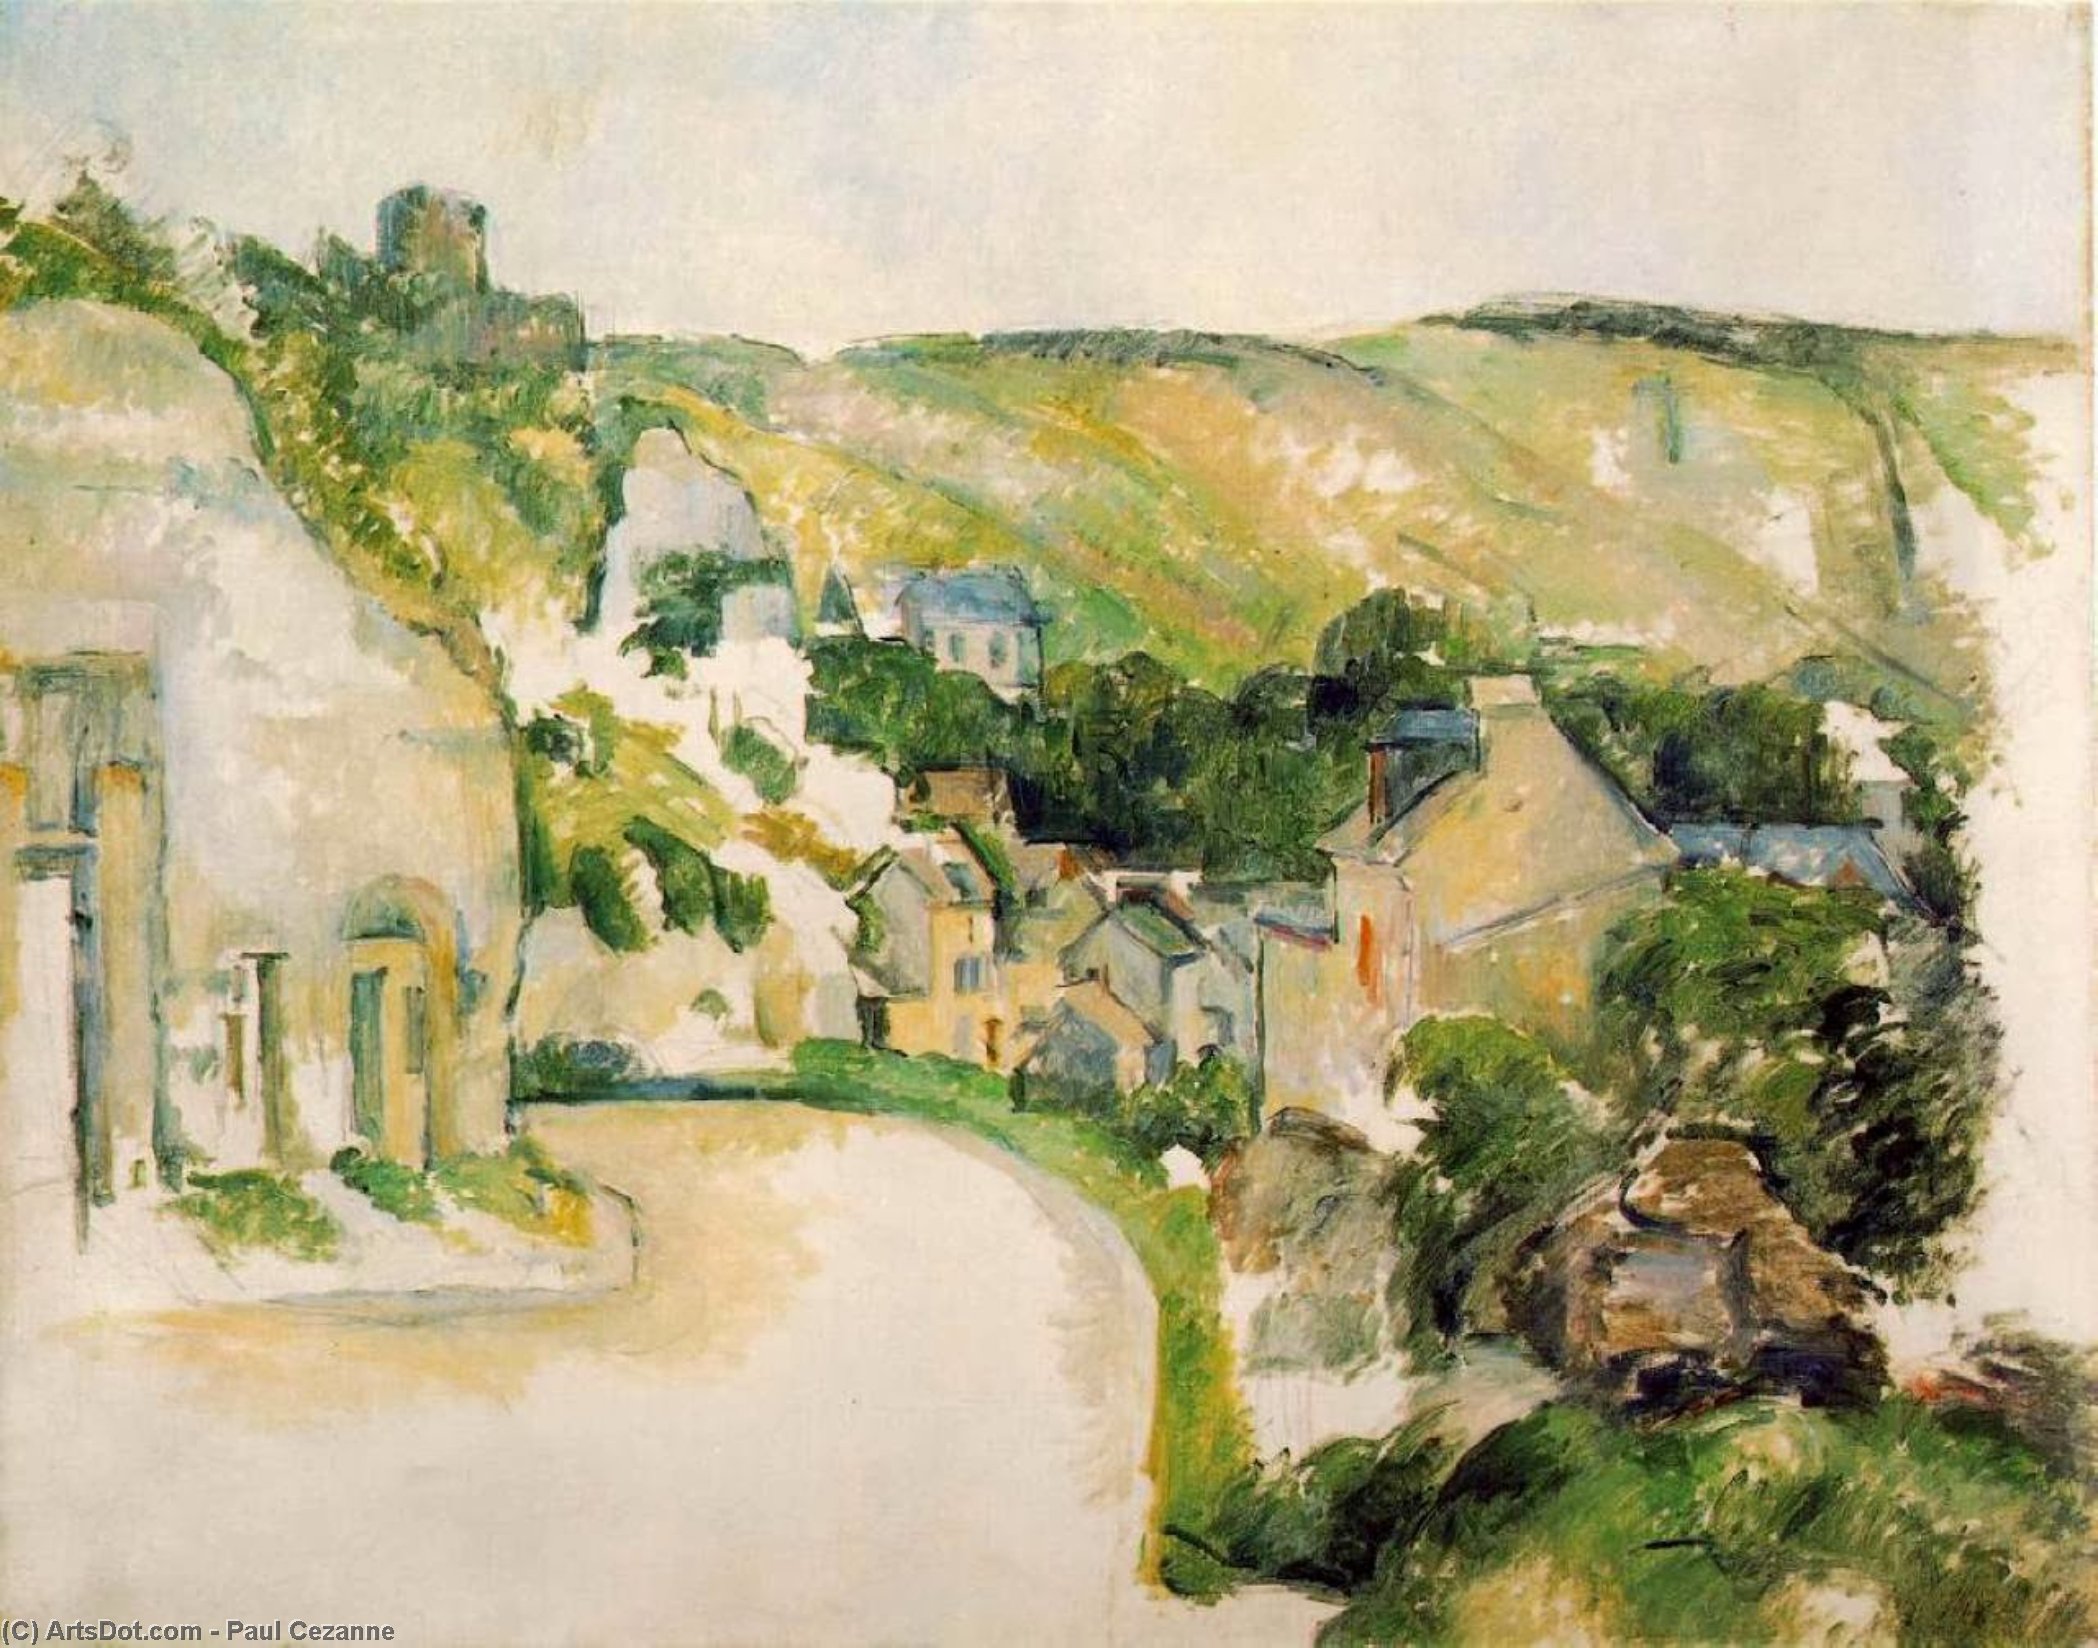 Buy Museum Art Reproductions A Turn on the Road at Roche-Ruyon, 1885 by Paul Cezanne (1839-1906, France) | ArtsDot.com